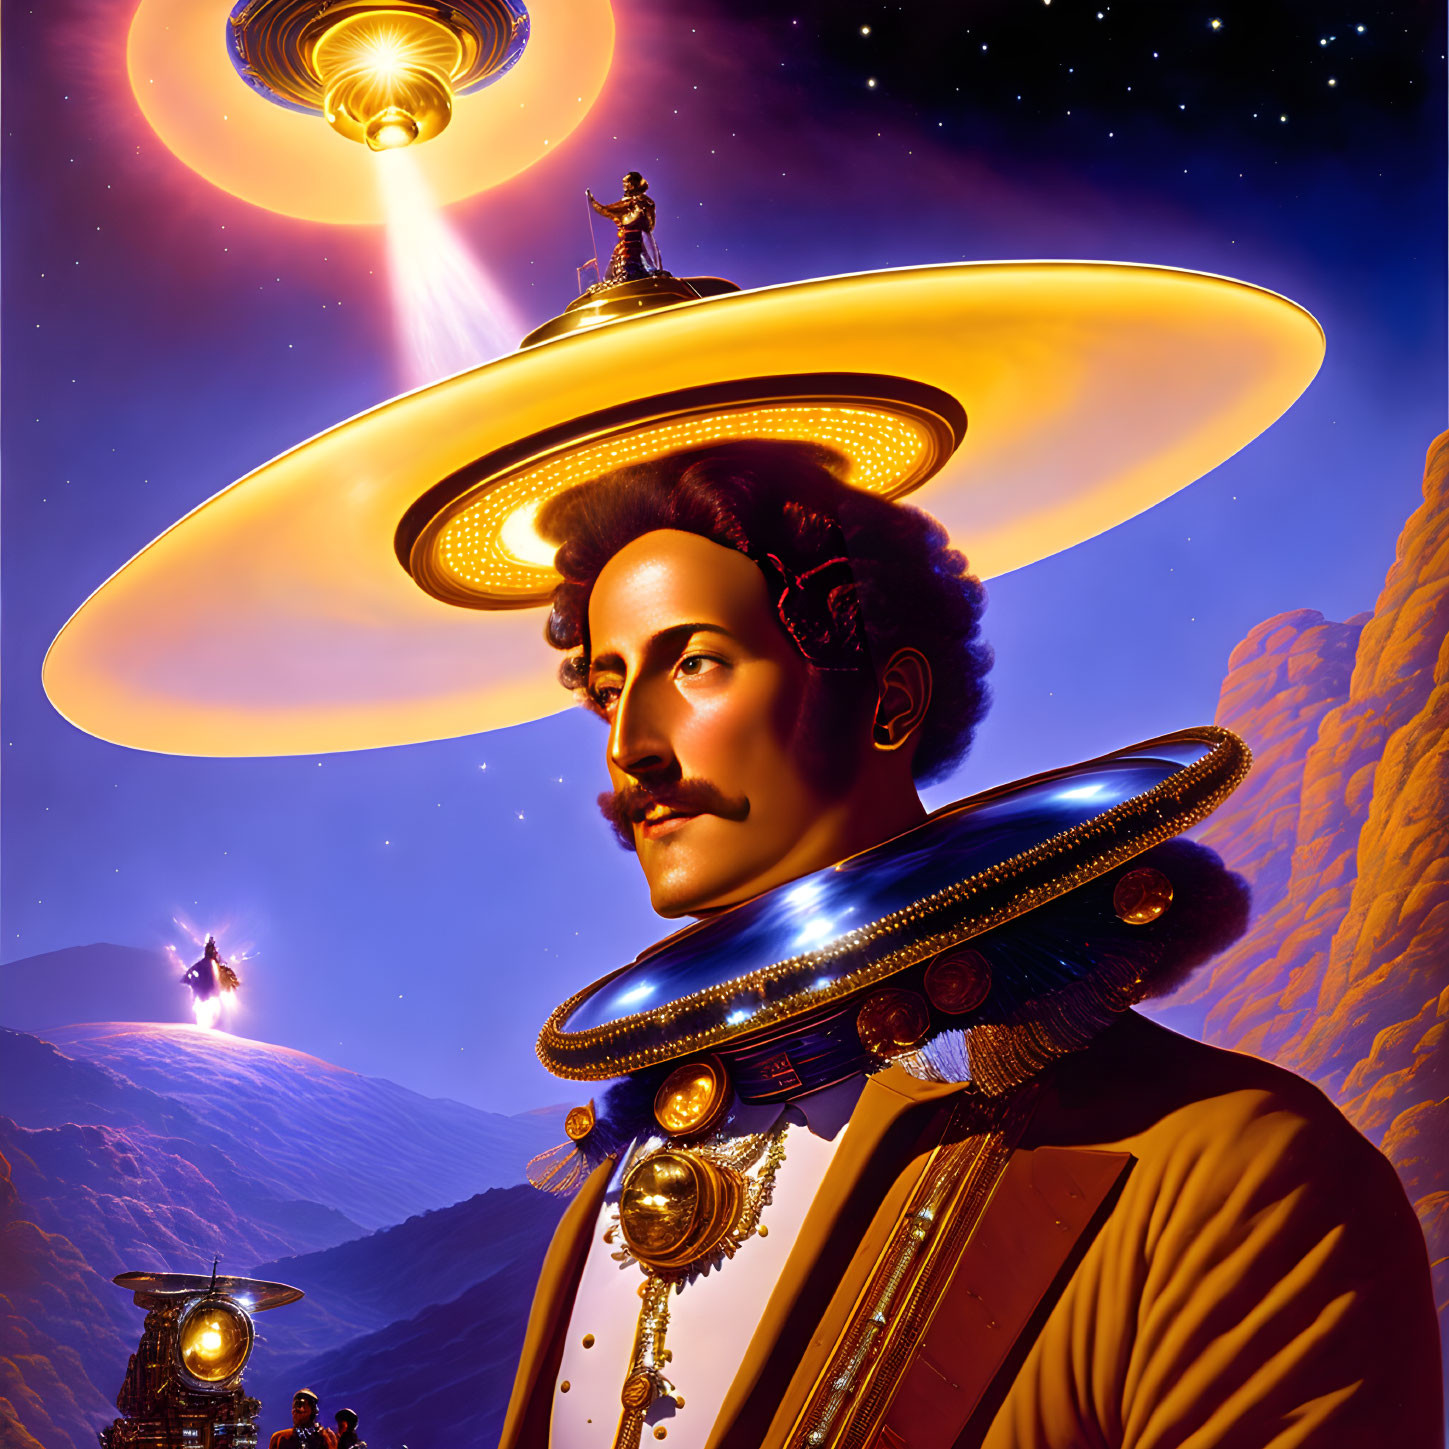 Surreal portrait of man with planets and UFOs in cosmic setting